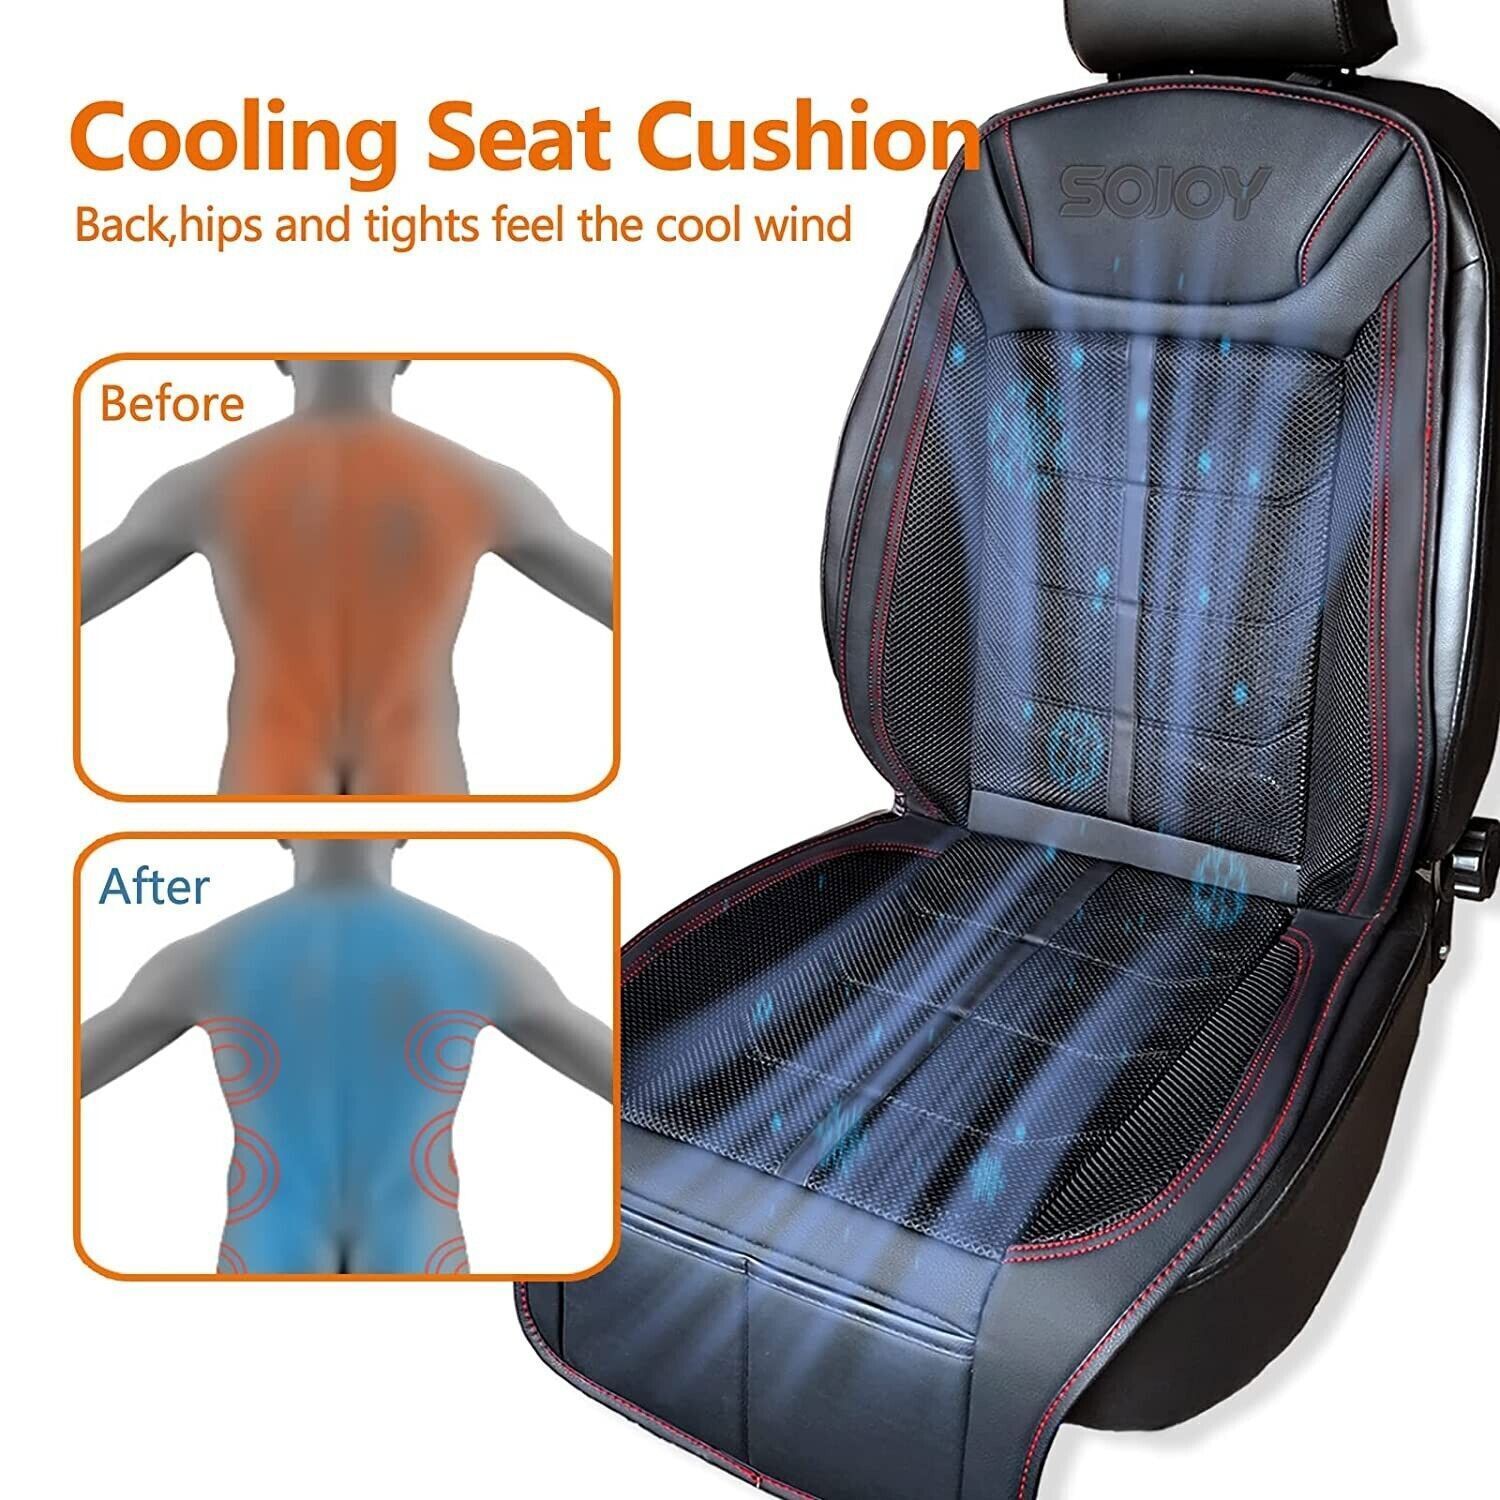 Sojoy Cooling Car Seat Cover/Cushion with Headrest